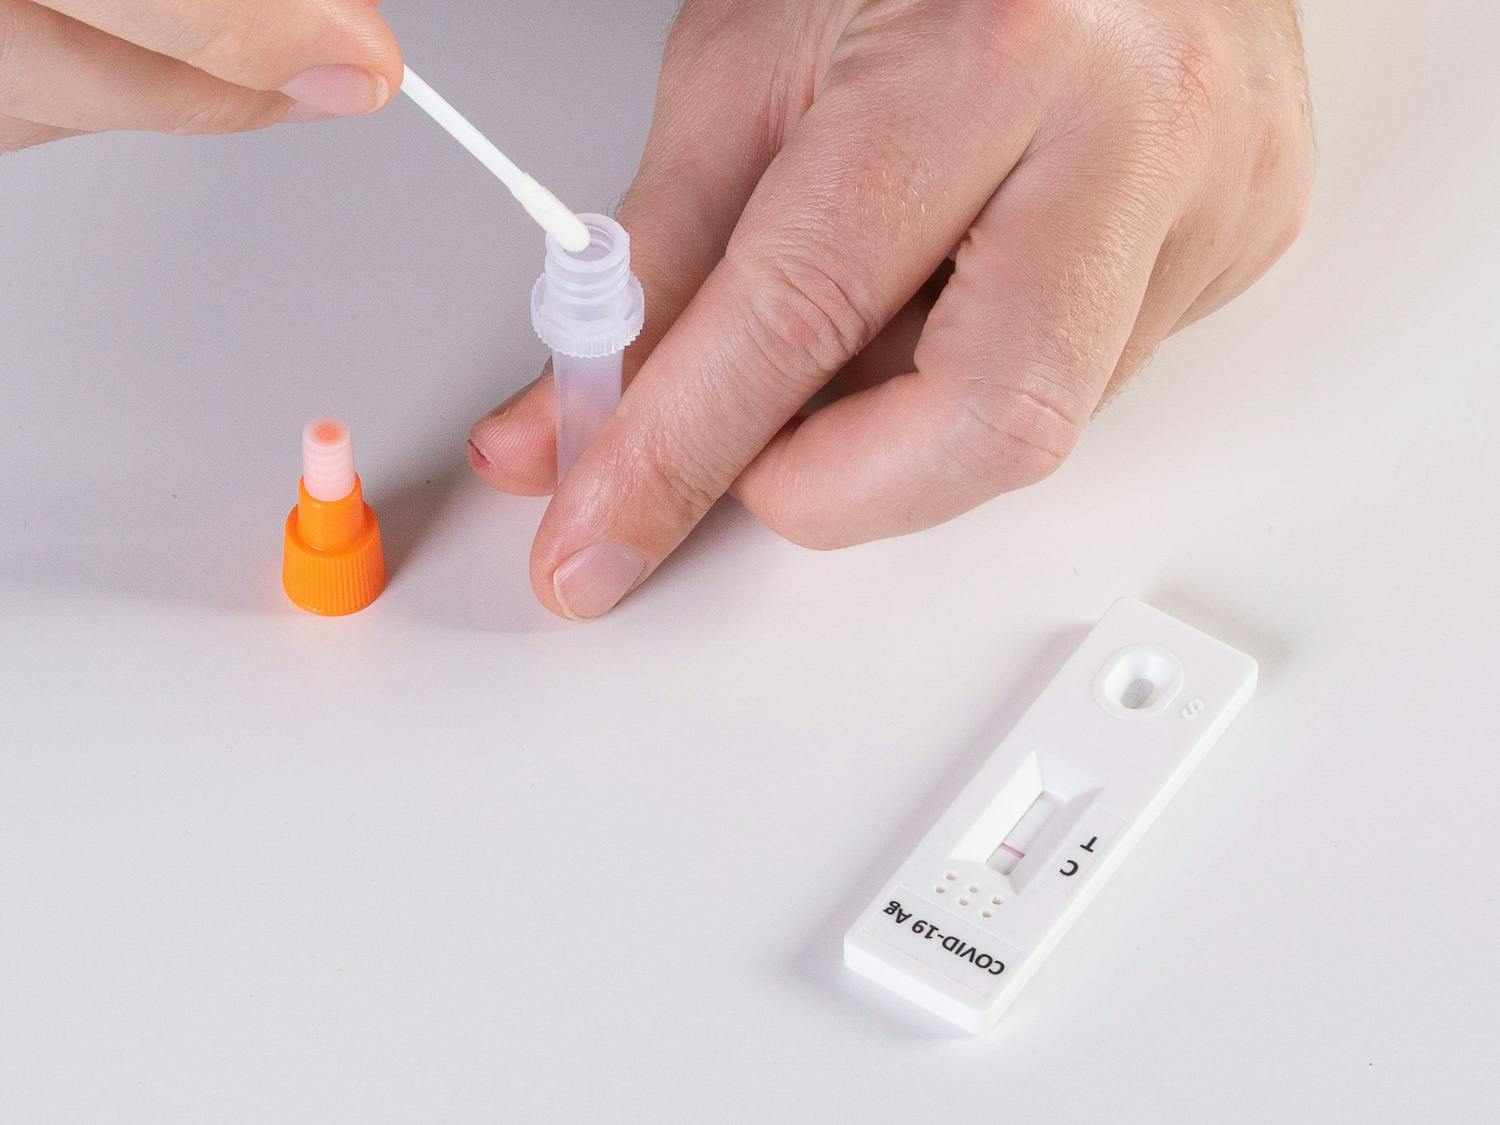 The United States Food and Drug Administration recently approved an at-home test for flu and COVID-19 (Photo courtesy of Flickr/“Making a Covid 19 home self test” by Jernej Furman. September 29, 2021). 